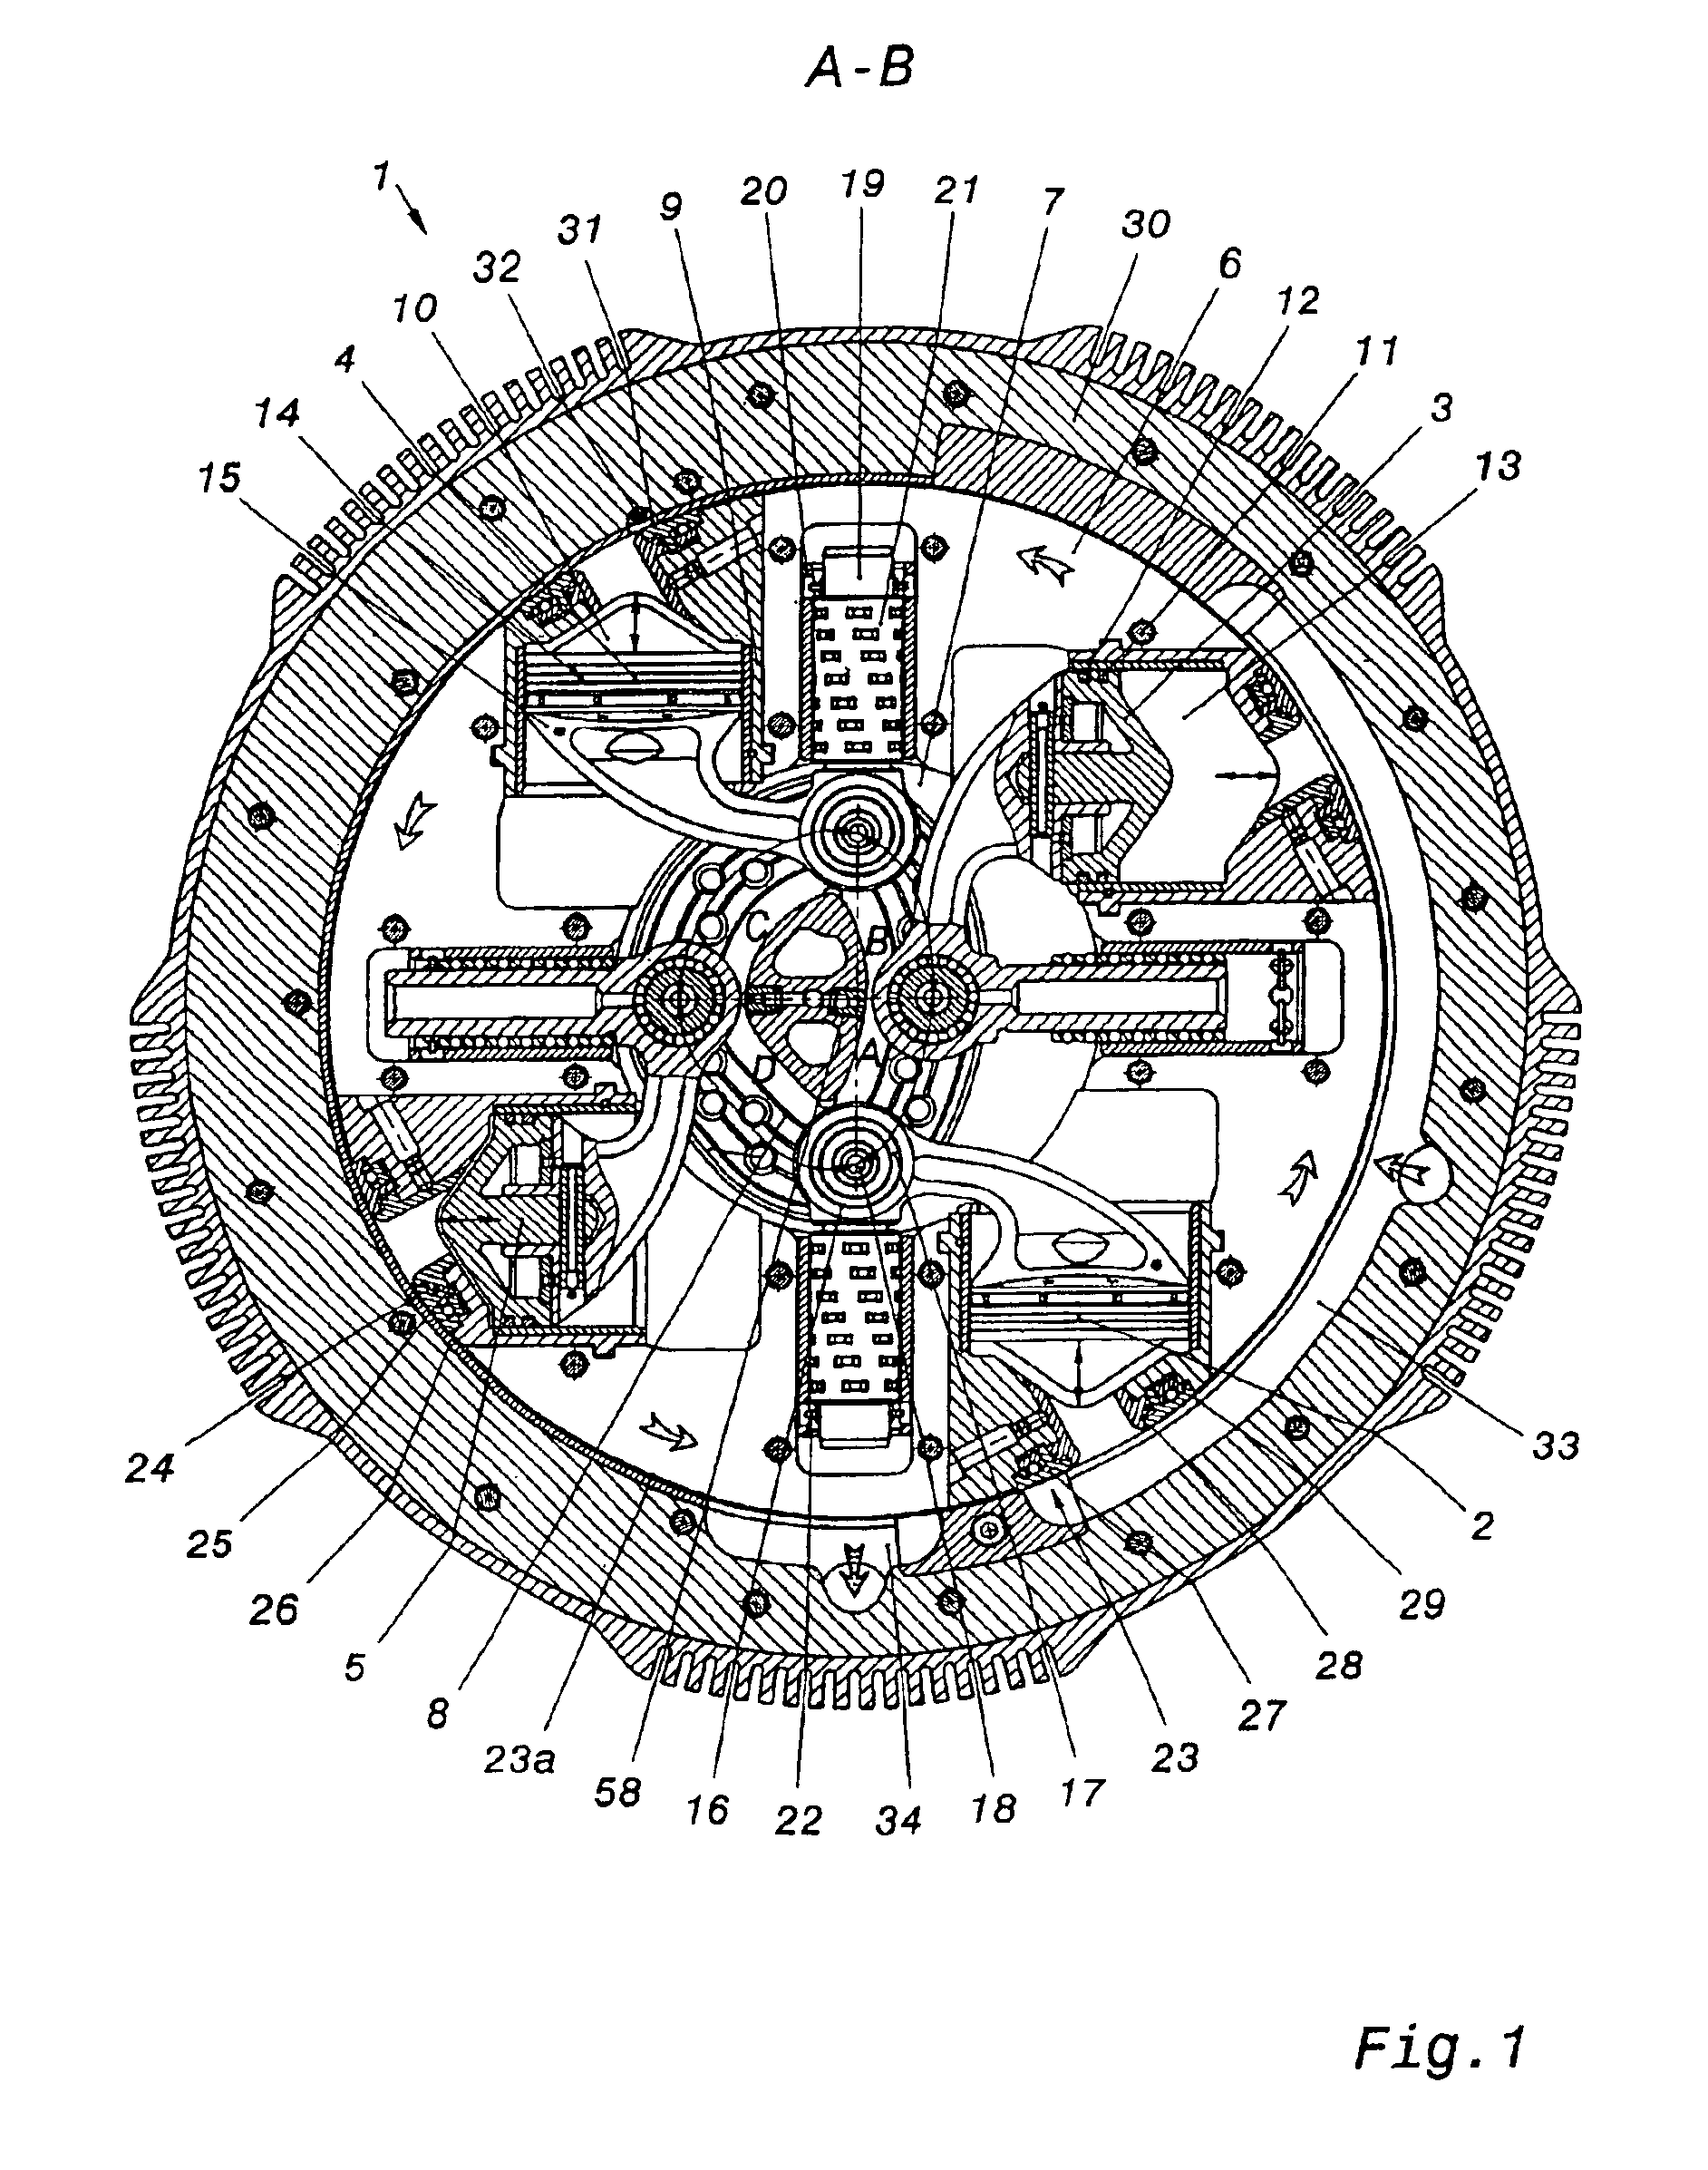 Reciprocating piston engine comprising a rotative cylinder